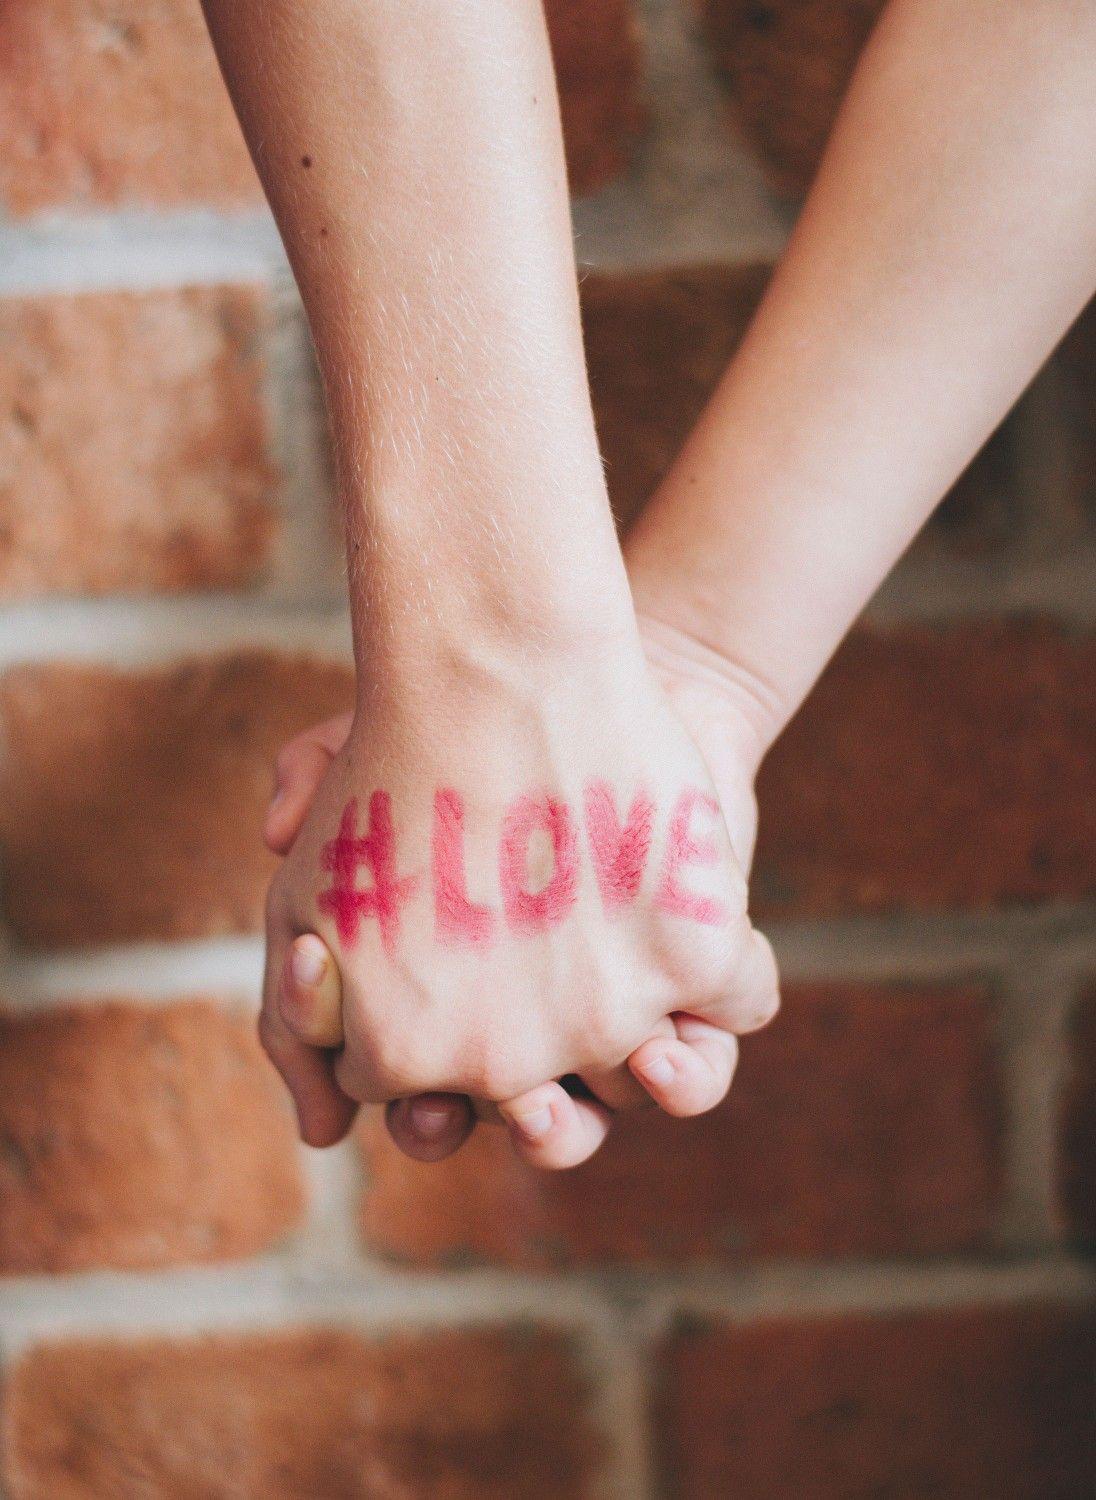 Love on hands #wallpaper. android wallpaper, iphone wallpaper